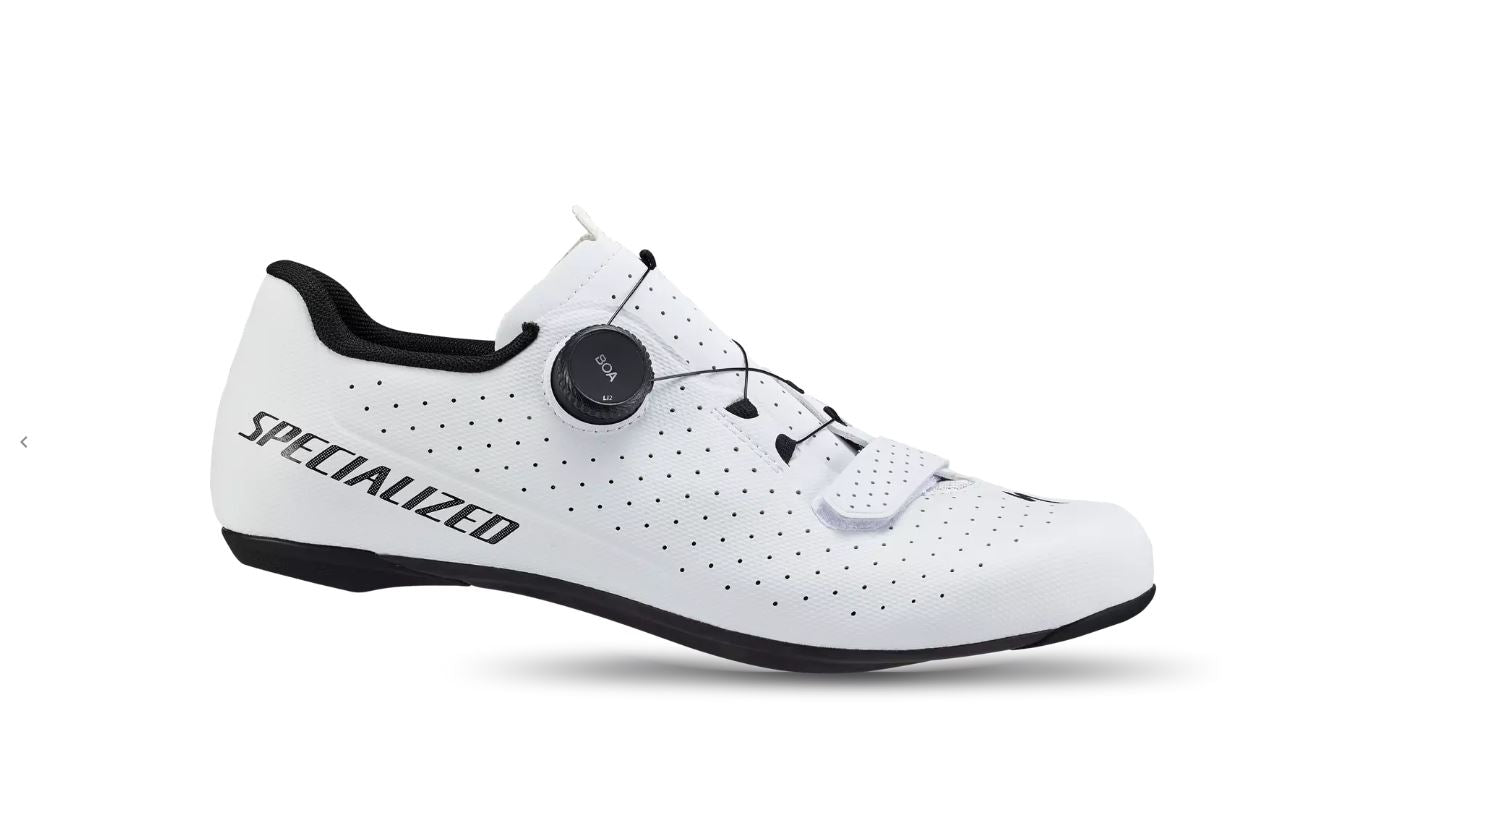 Specialized Torch 2.0 Road Bike Shoe white